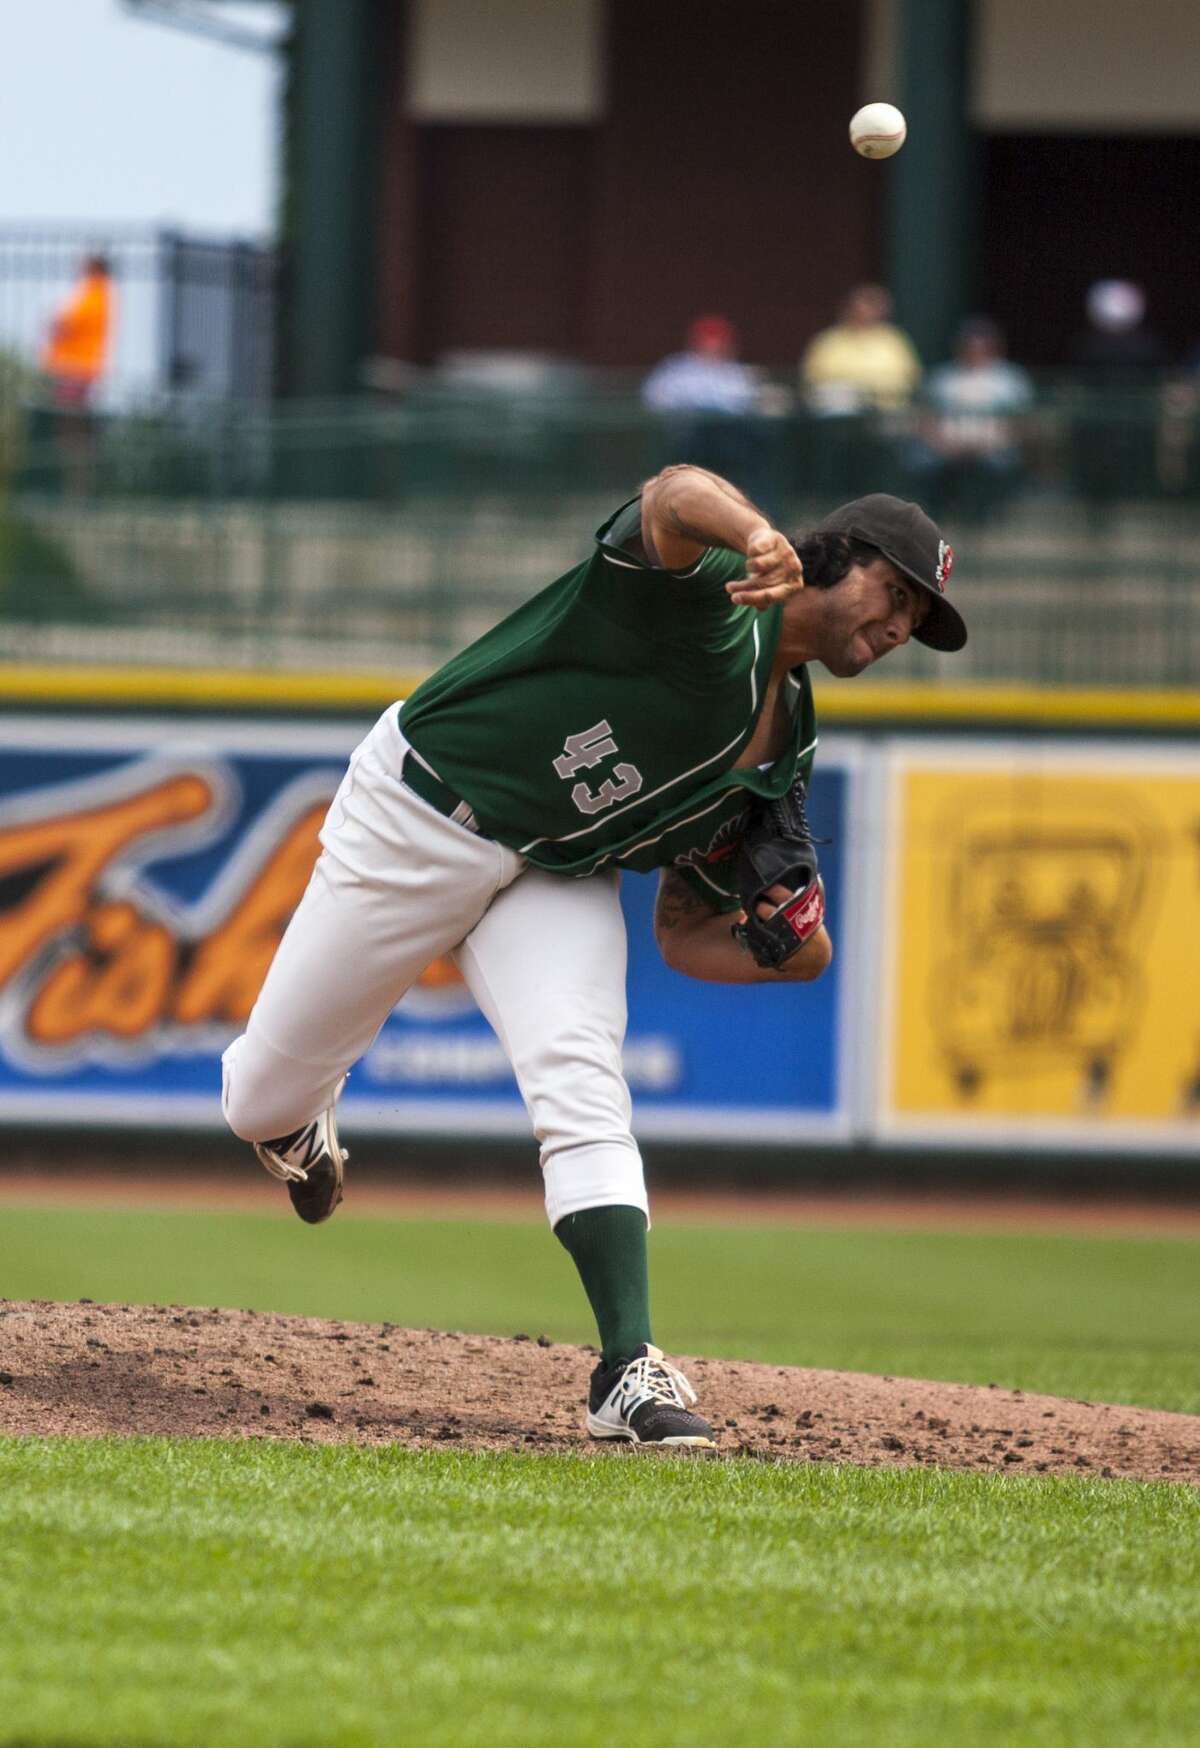 The Loons' Chris Mathewson pitches during the Great Lakes Loons vs. the Fort Wayne TinCaps game at Dow Diamond on Sunday, August 6, 2017.